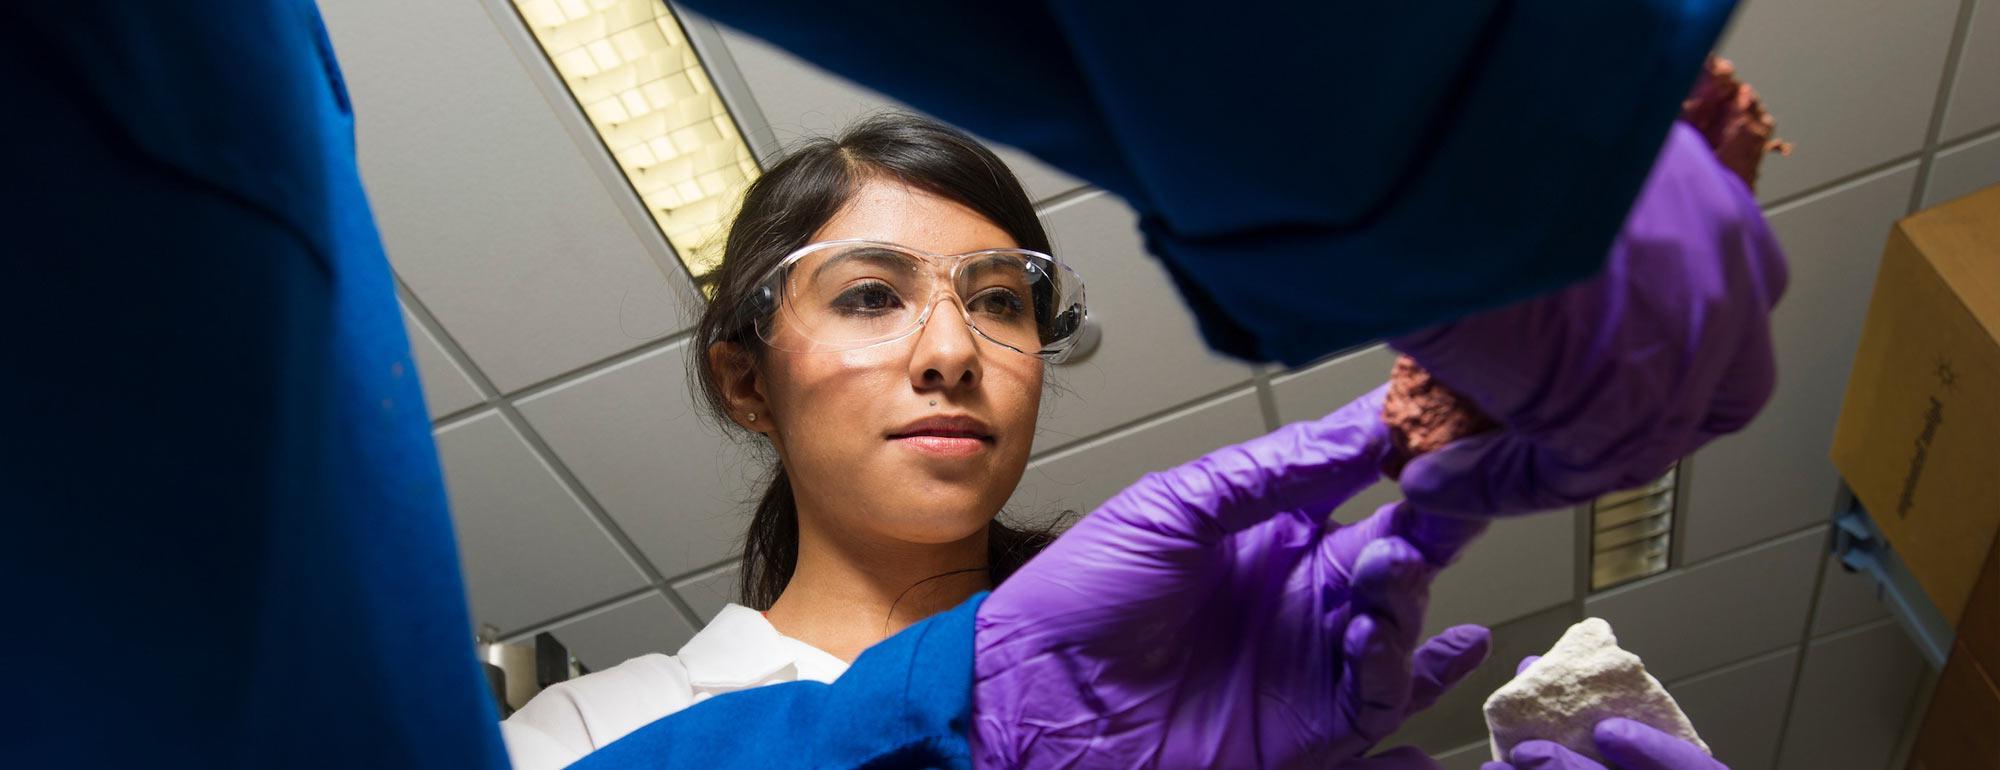 A female student works with a researcher in a lab on the UC Davis campus